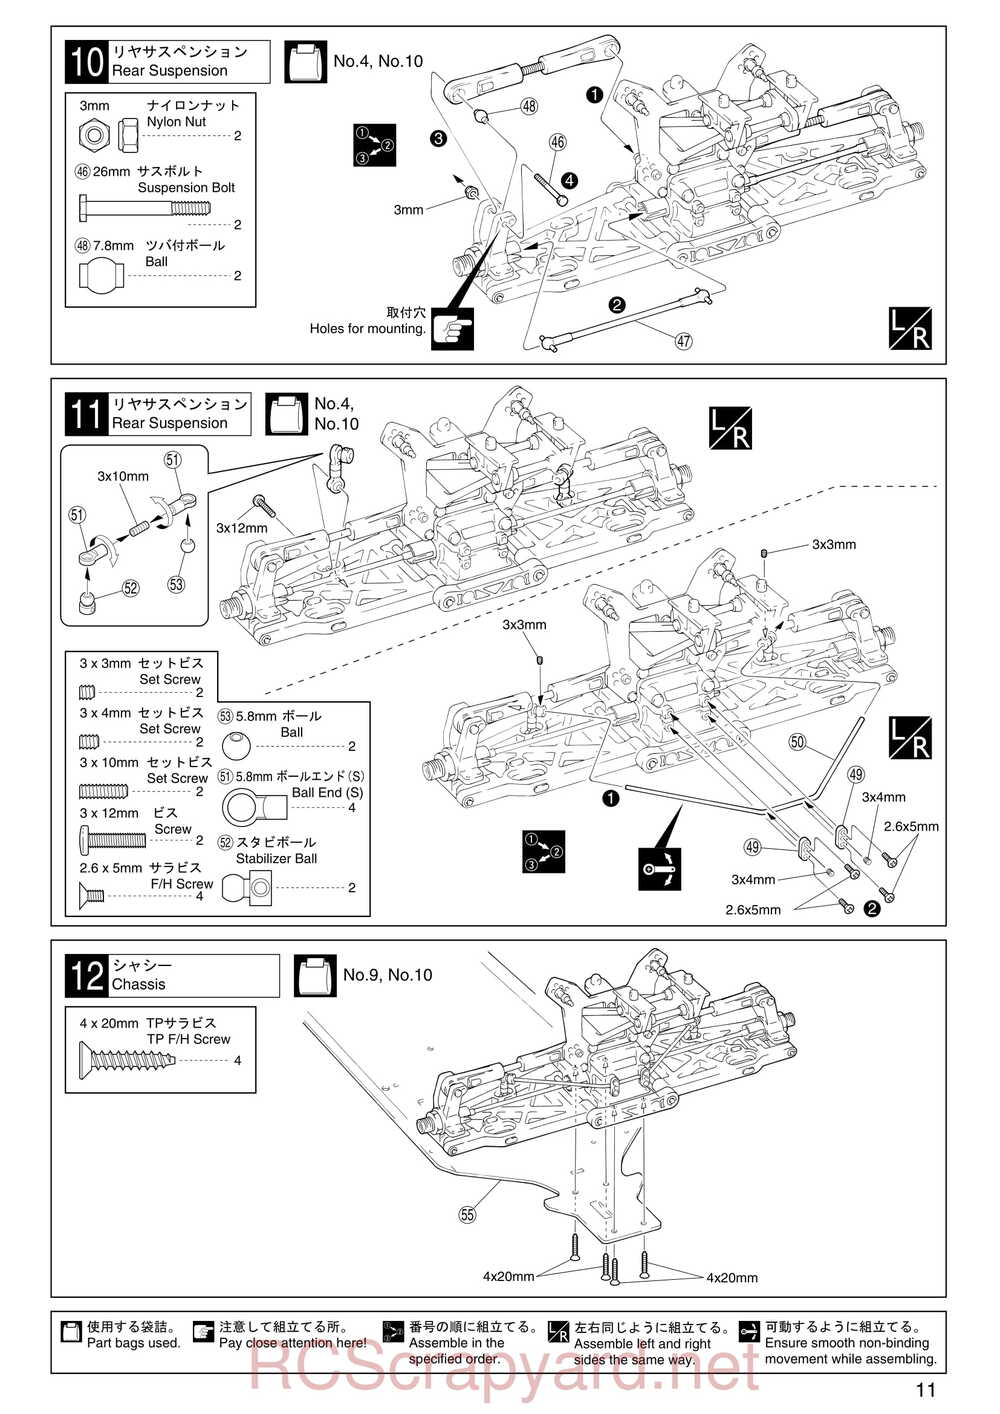 Kyosho - 31081- Inferno-MP-7-5 - Manual - Page 11